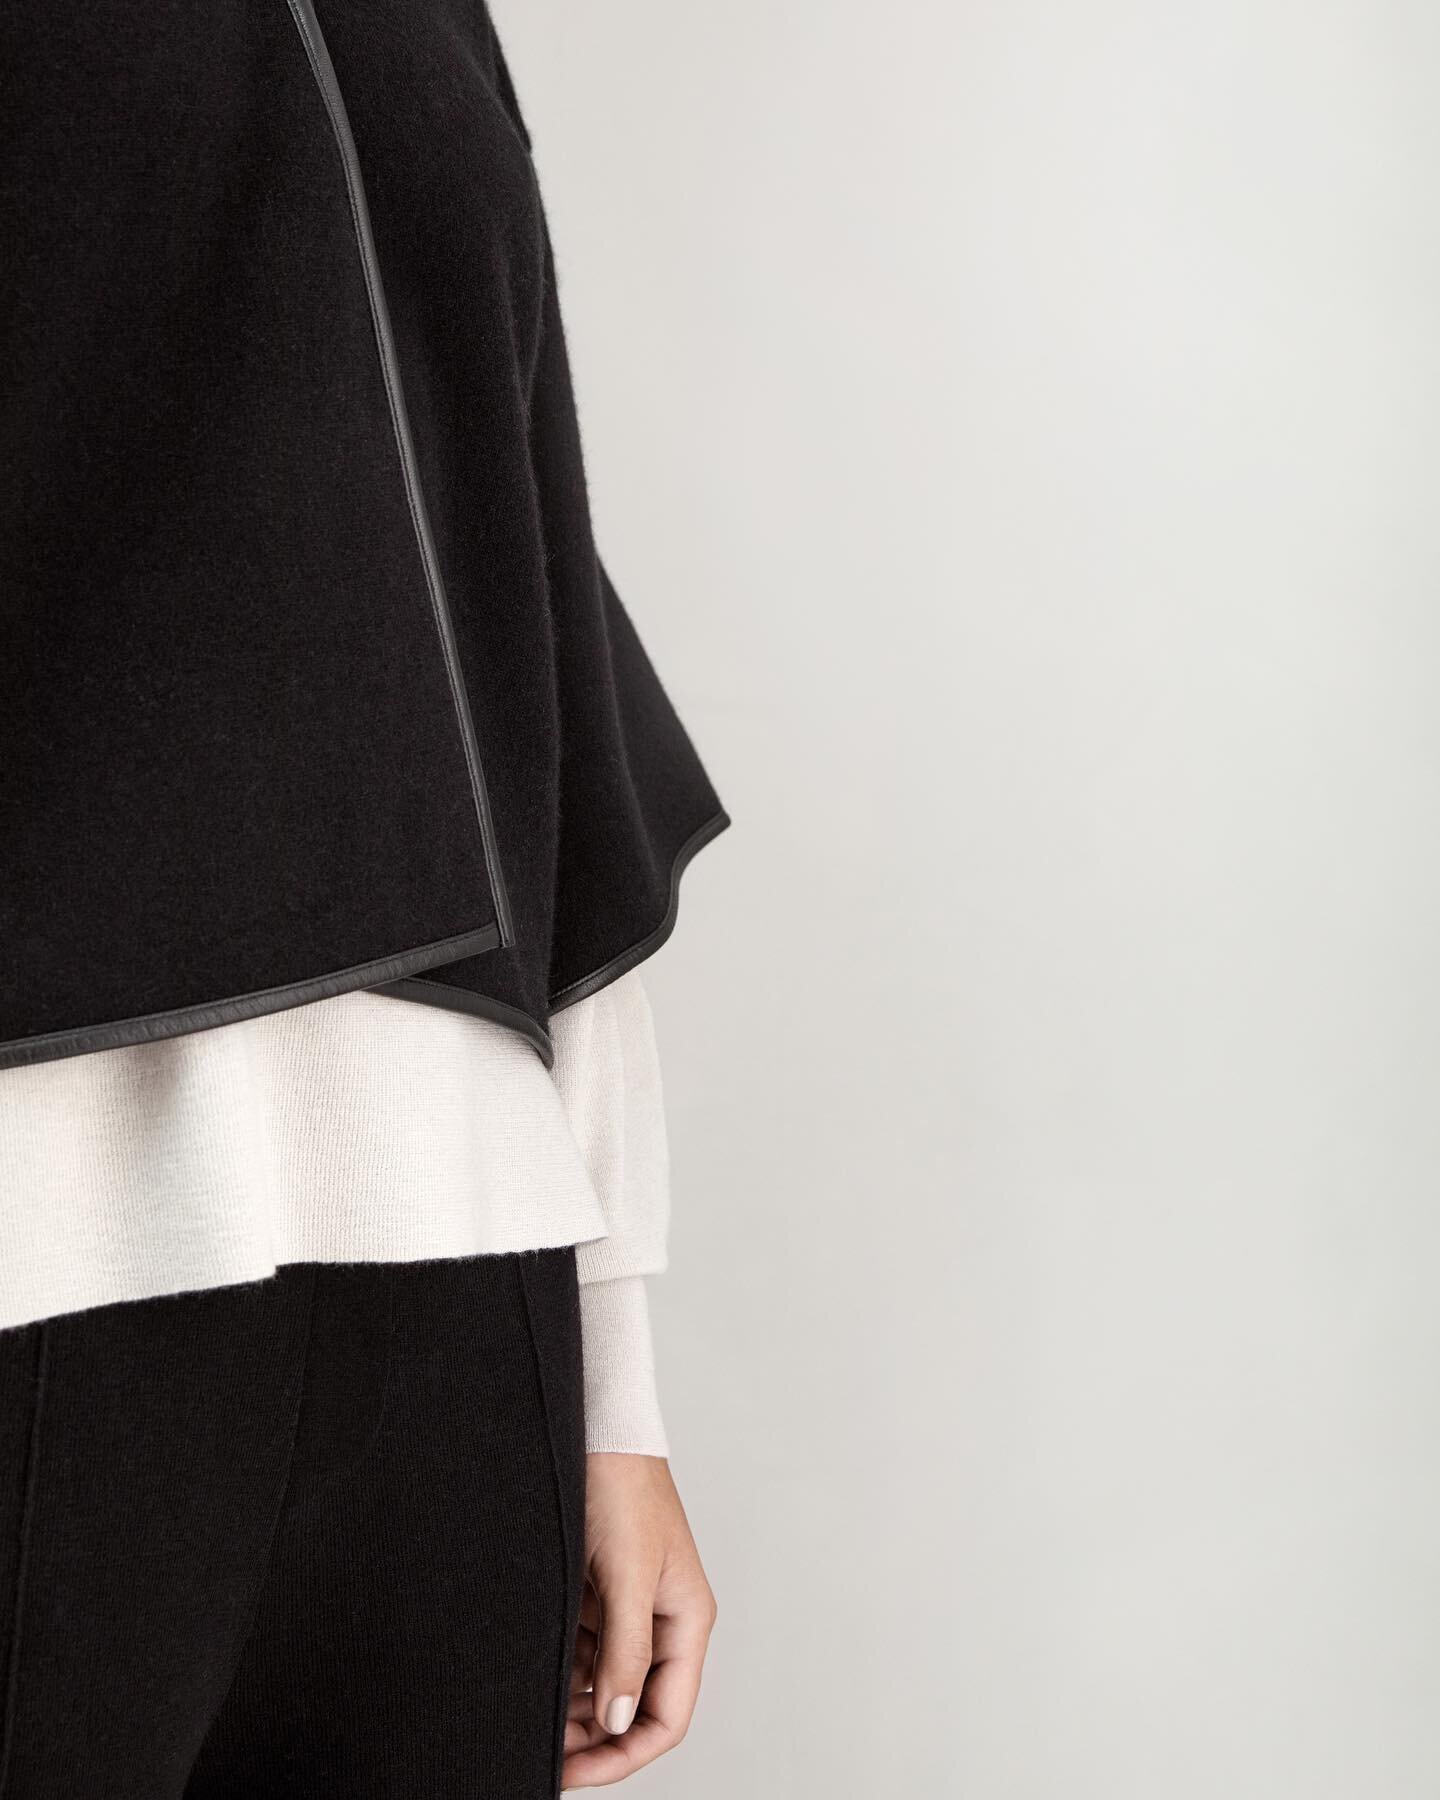 The Essence @moversandcashmere Outlined Cape, crafted with the finest cashmere and outlined with world-class leather @sorensenleather, gently sculpting our everyday move.